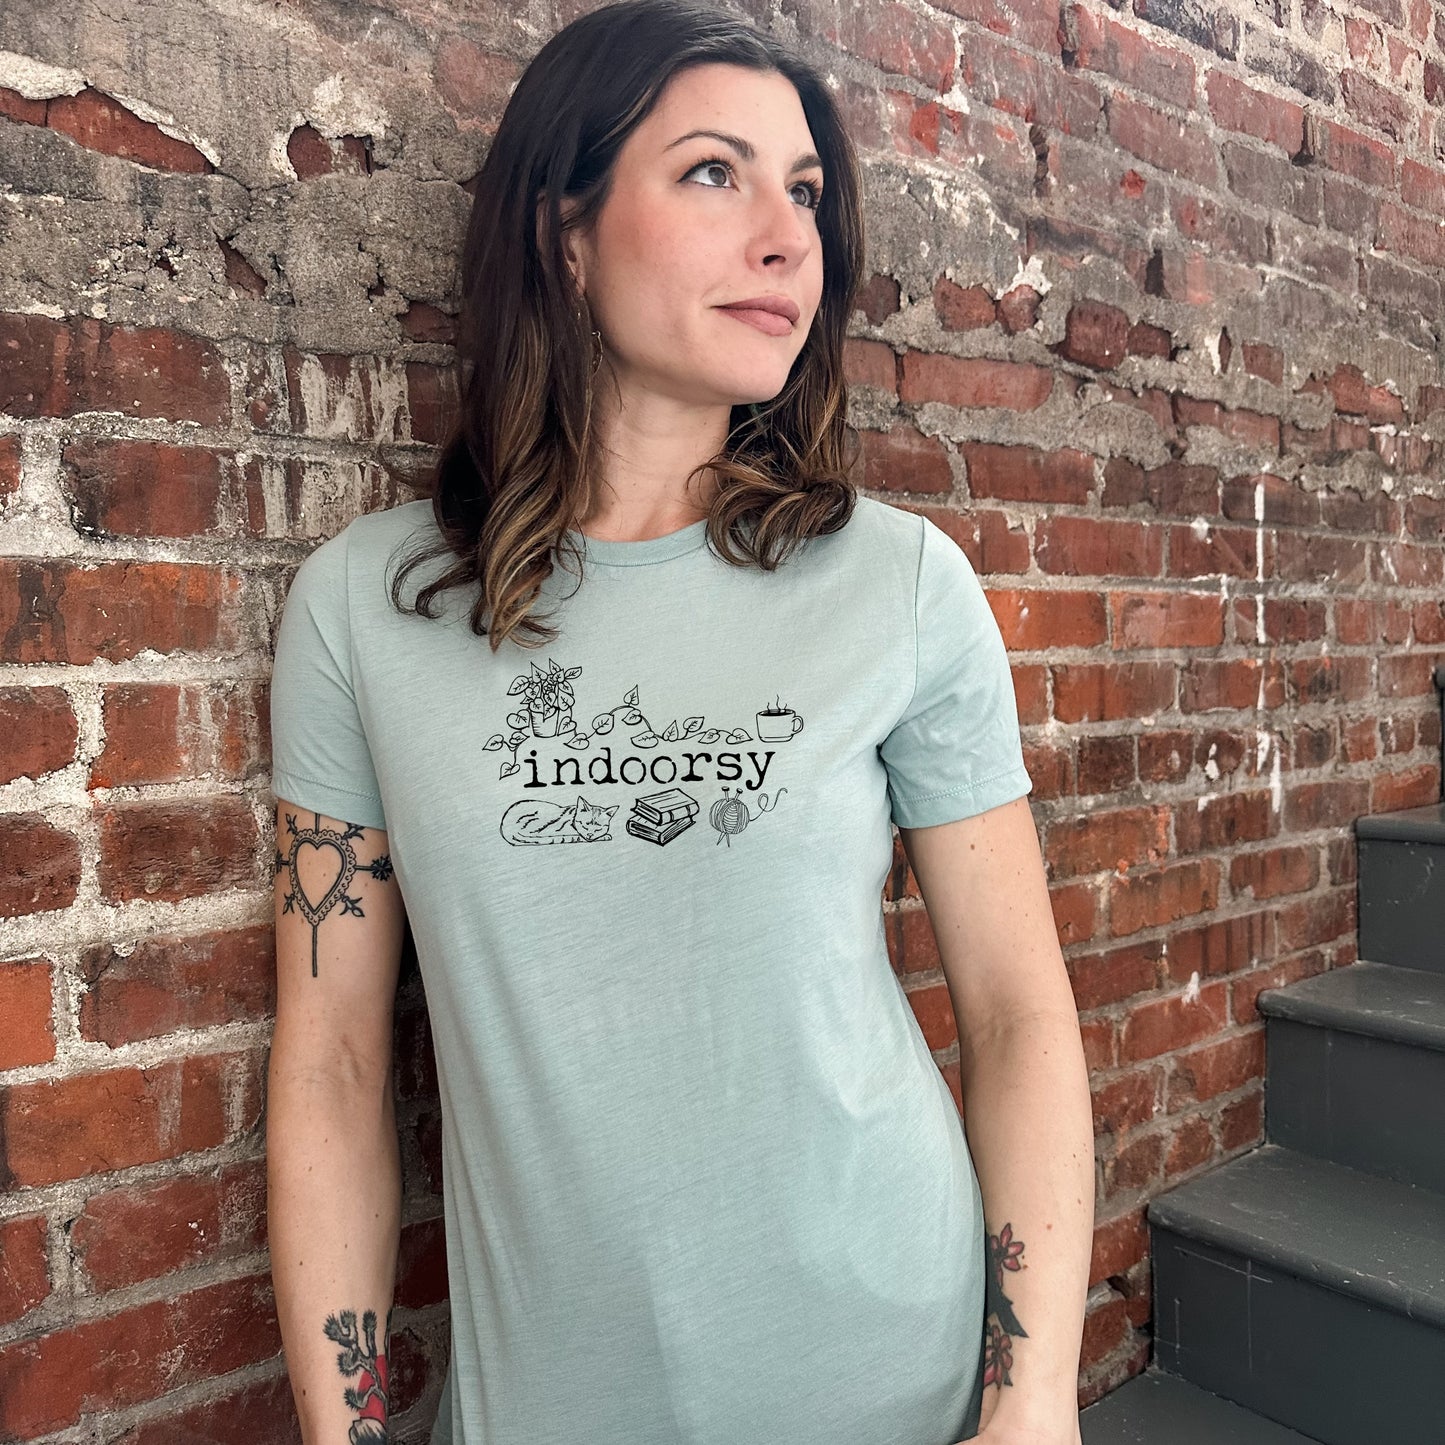 Indoorsy (Introverts, Cat) - Women's Crew Tee - Olive or Dusty Blue